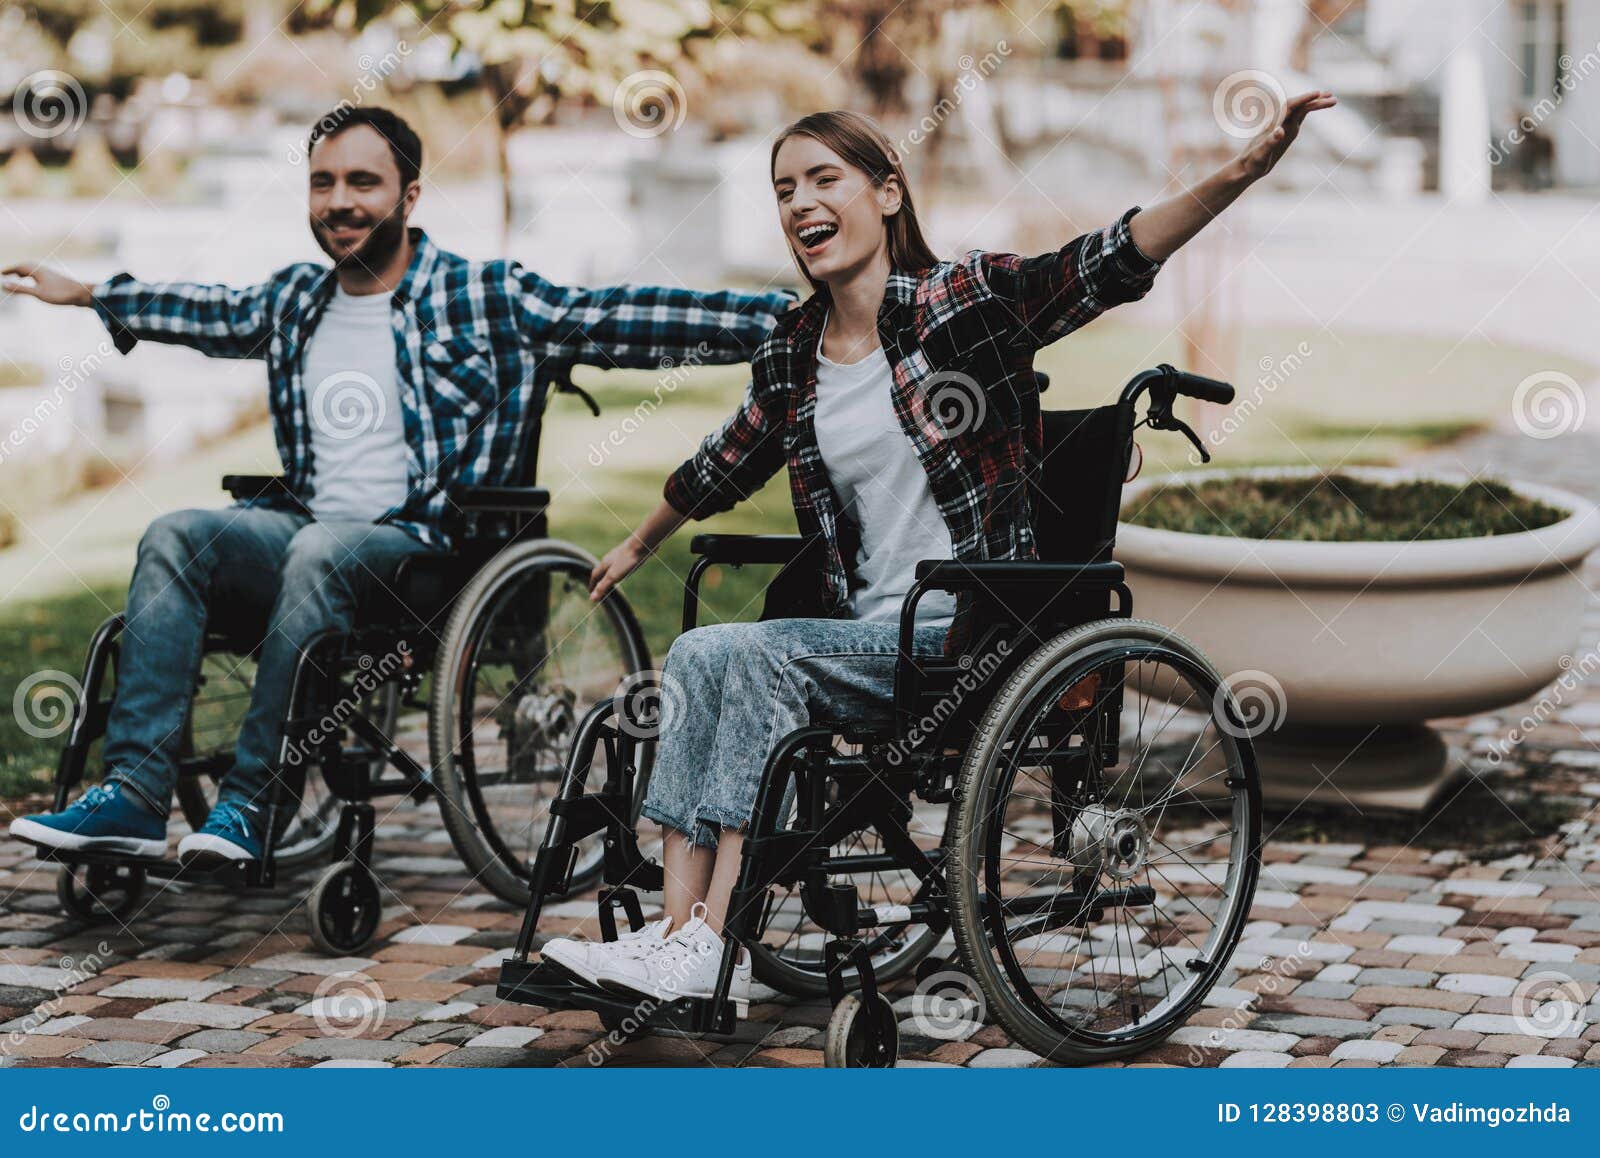 Disabled People on Wheelchairs Have Fun in Park. Stock Image - Image of ...